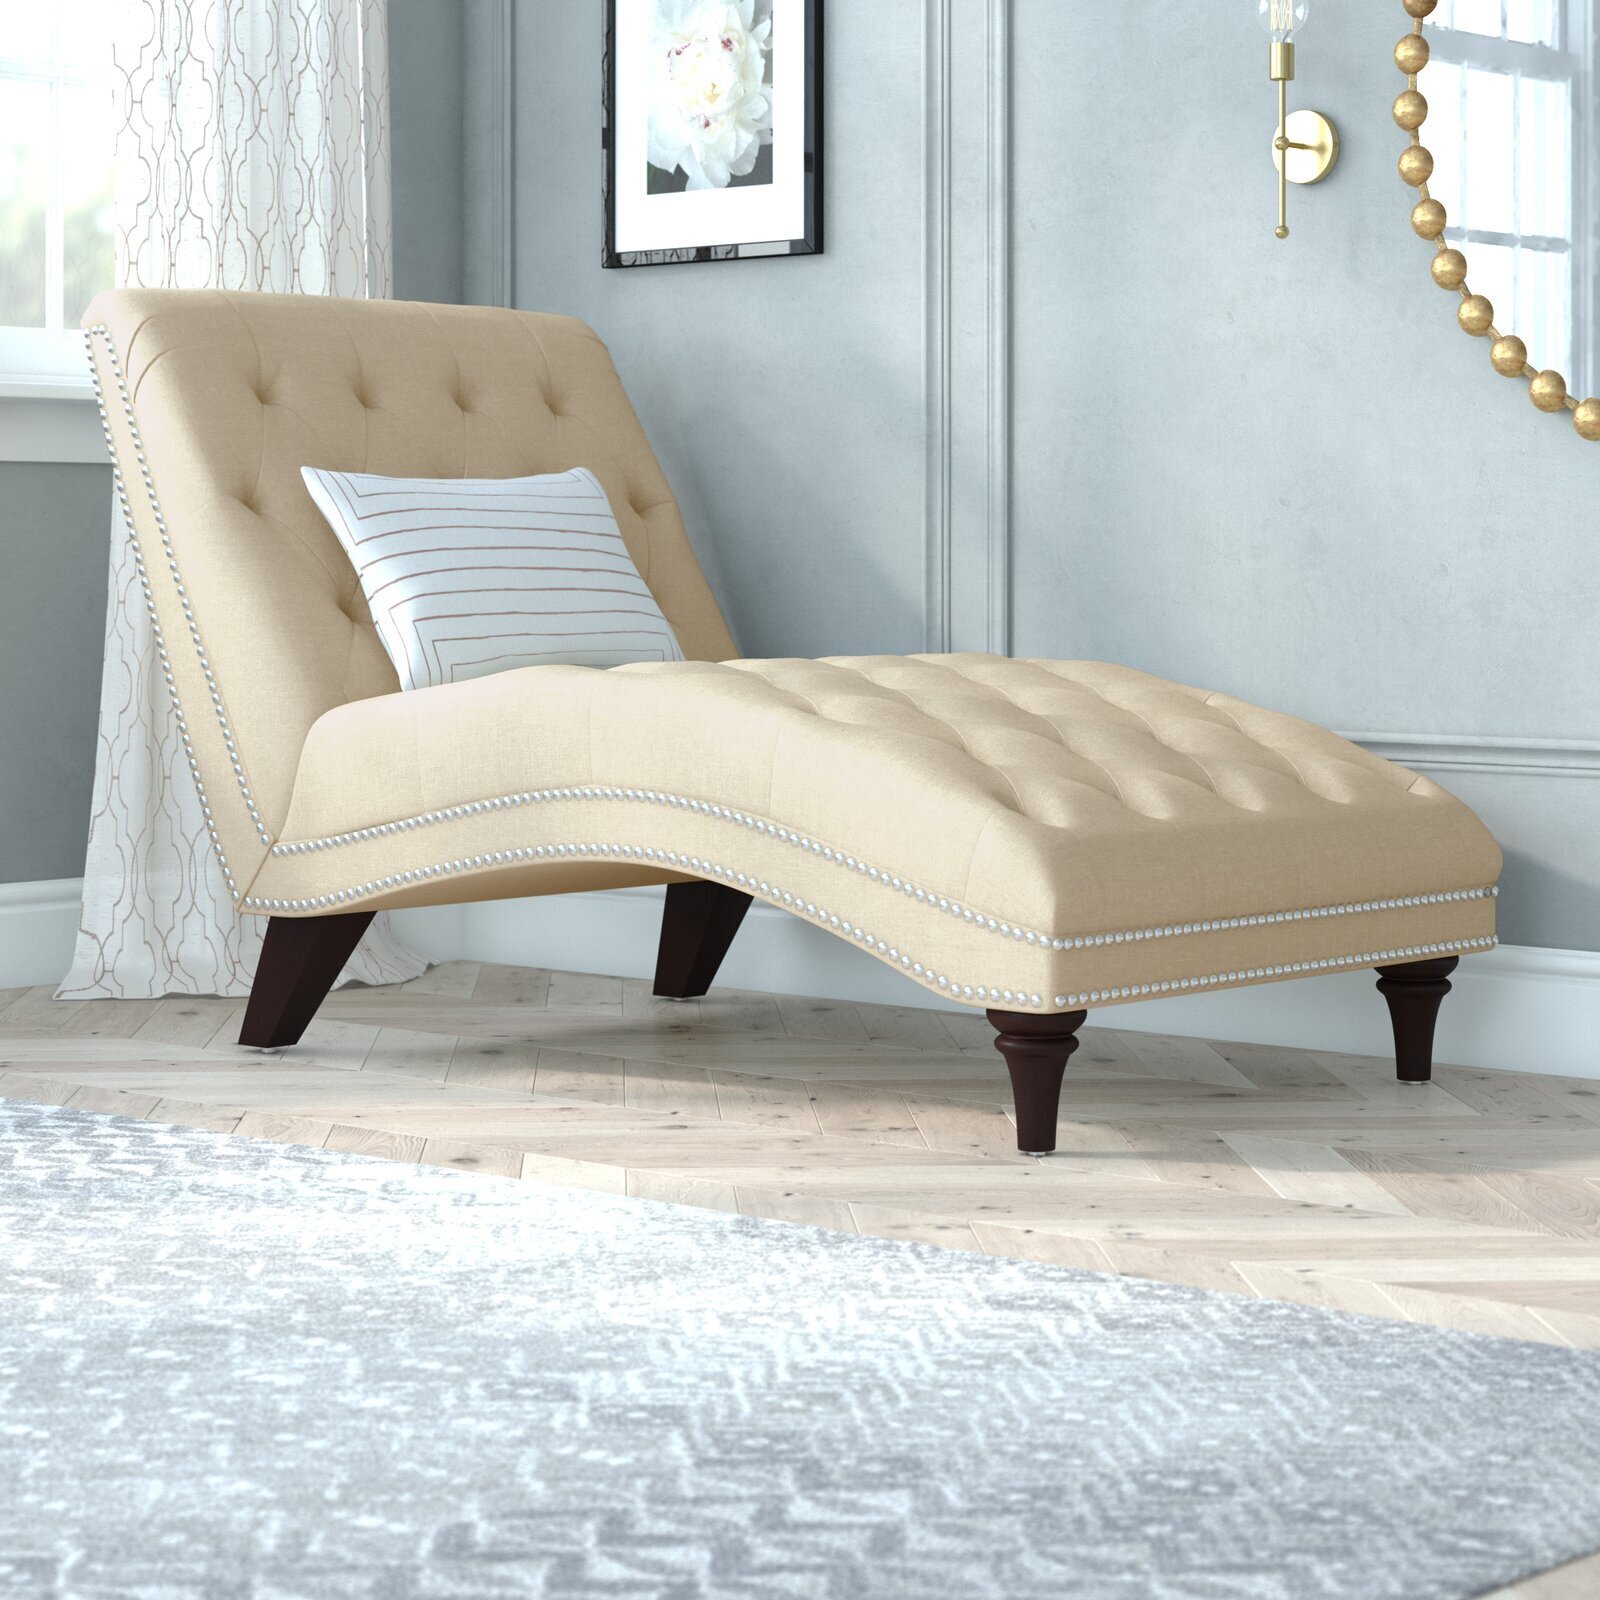 Graceful Chaise Lounge